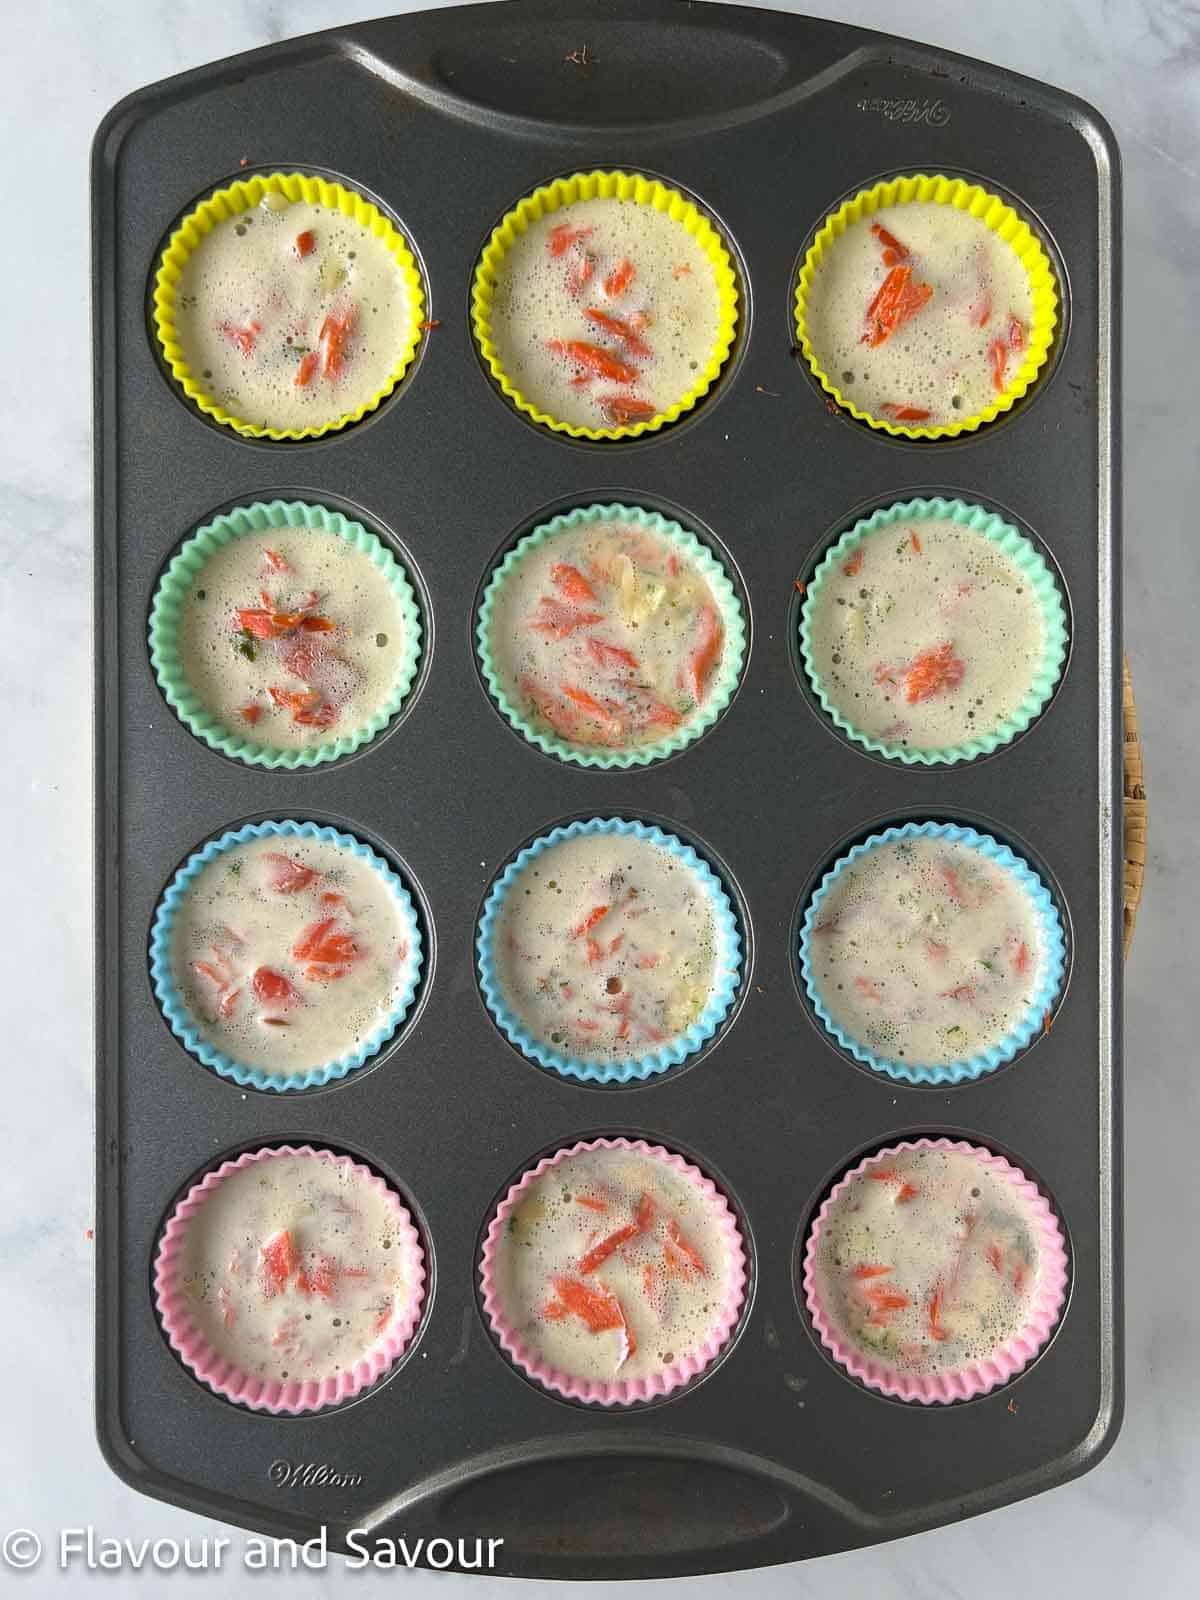 Egg mixture added to mini smoked salmon quiche in silicone cups.